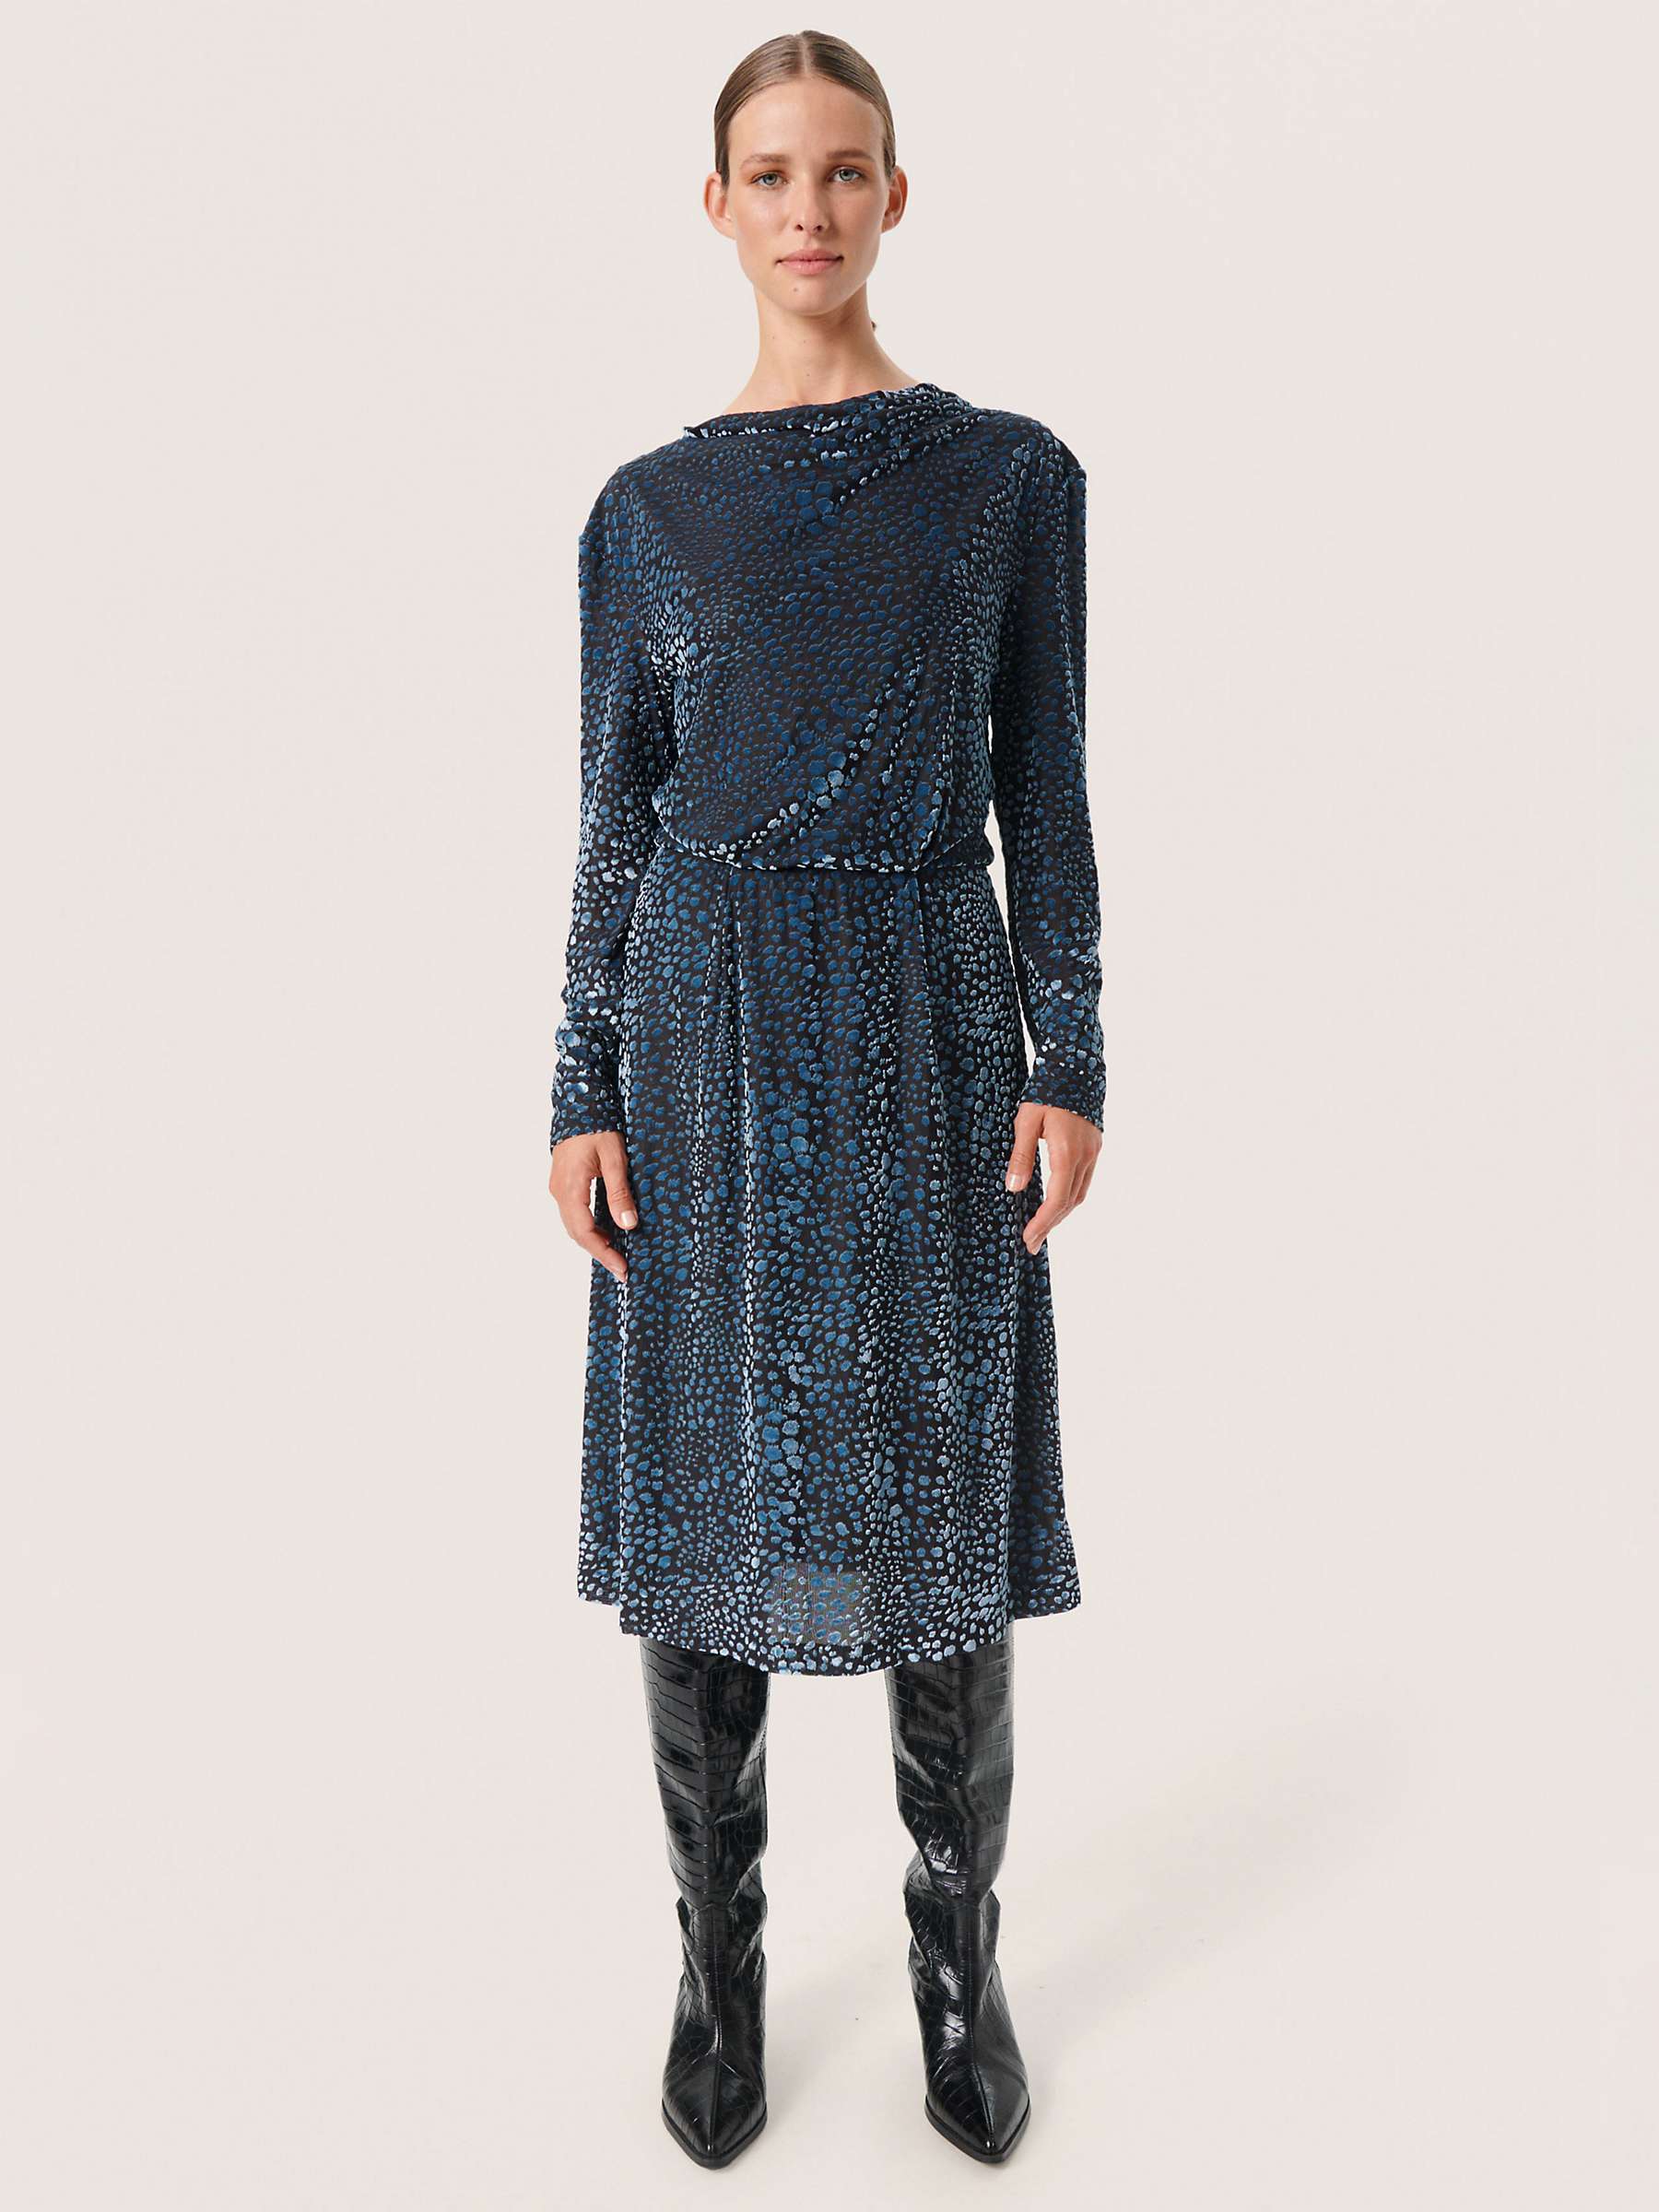 Buy Soaked In Luxury Nicha Open Back Knee-Length Dress, Faded Denim Burn Out Online at johnlewis.com